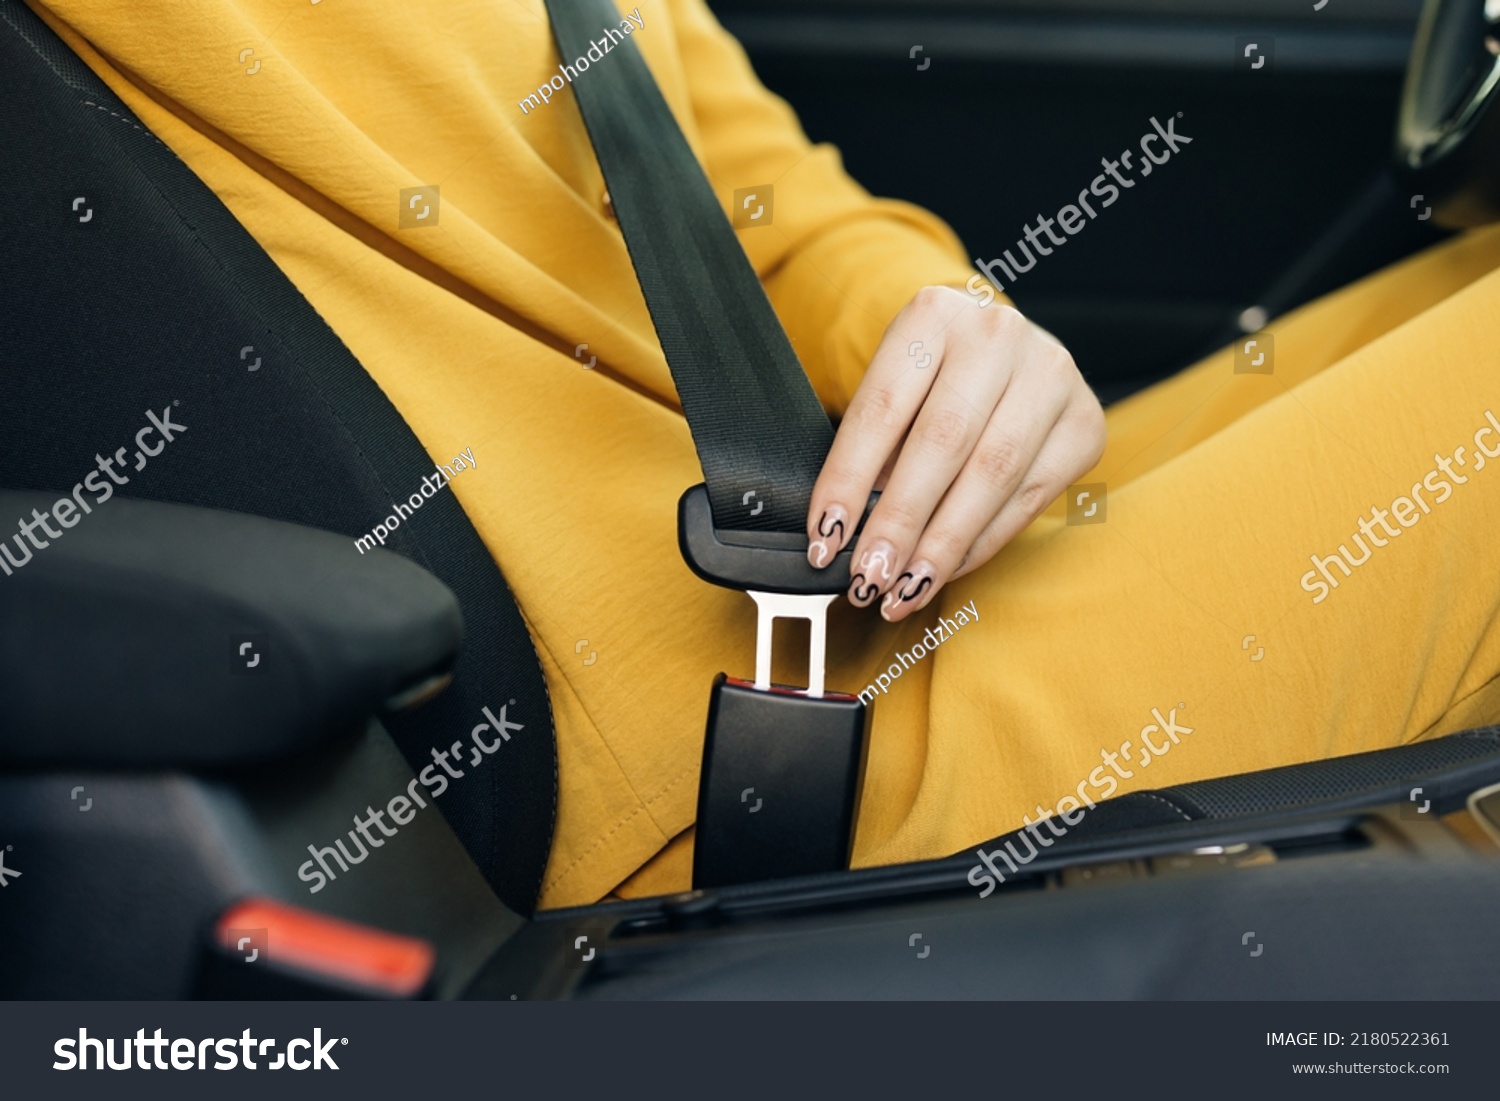 Woman Hand Fastening Car Safety Seat Belt. Protection Road Safety Snap Driving. Driver Fastening Seatbelt In Car. Woman Car Lap Buckling Seat Belt Inside In Vehicle Before Driving. #2180522361